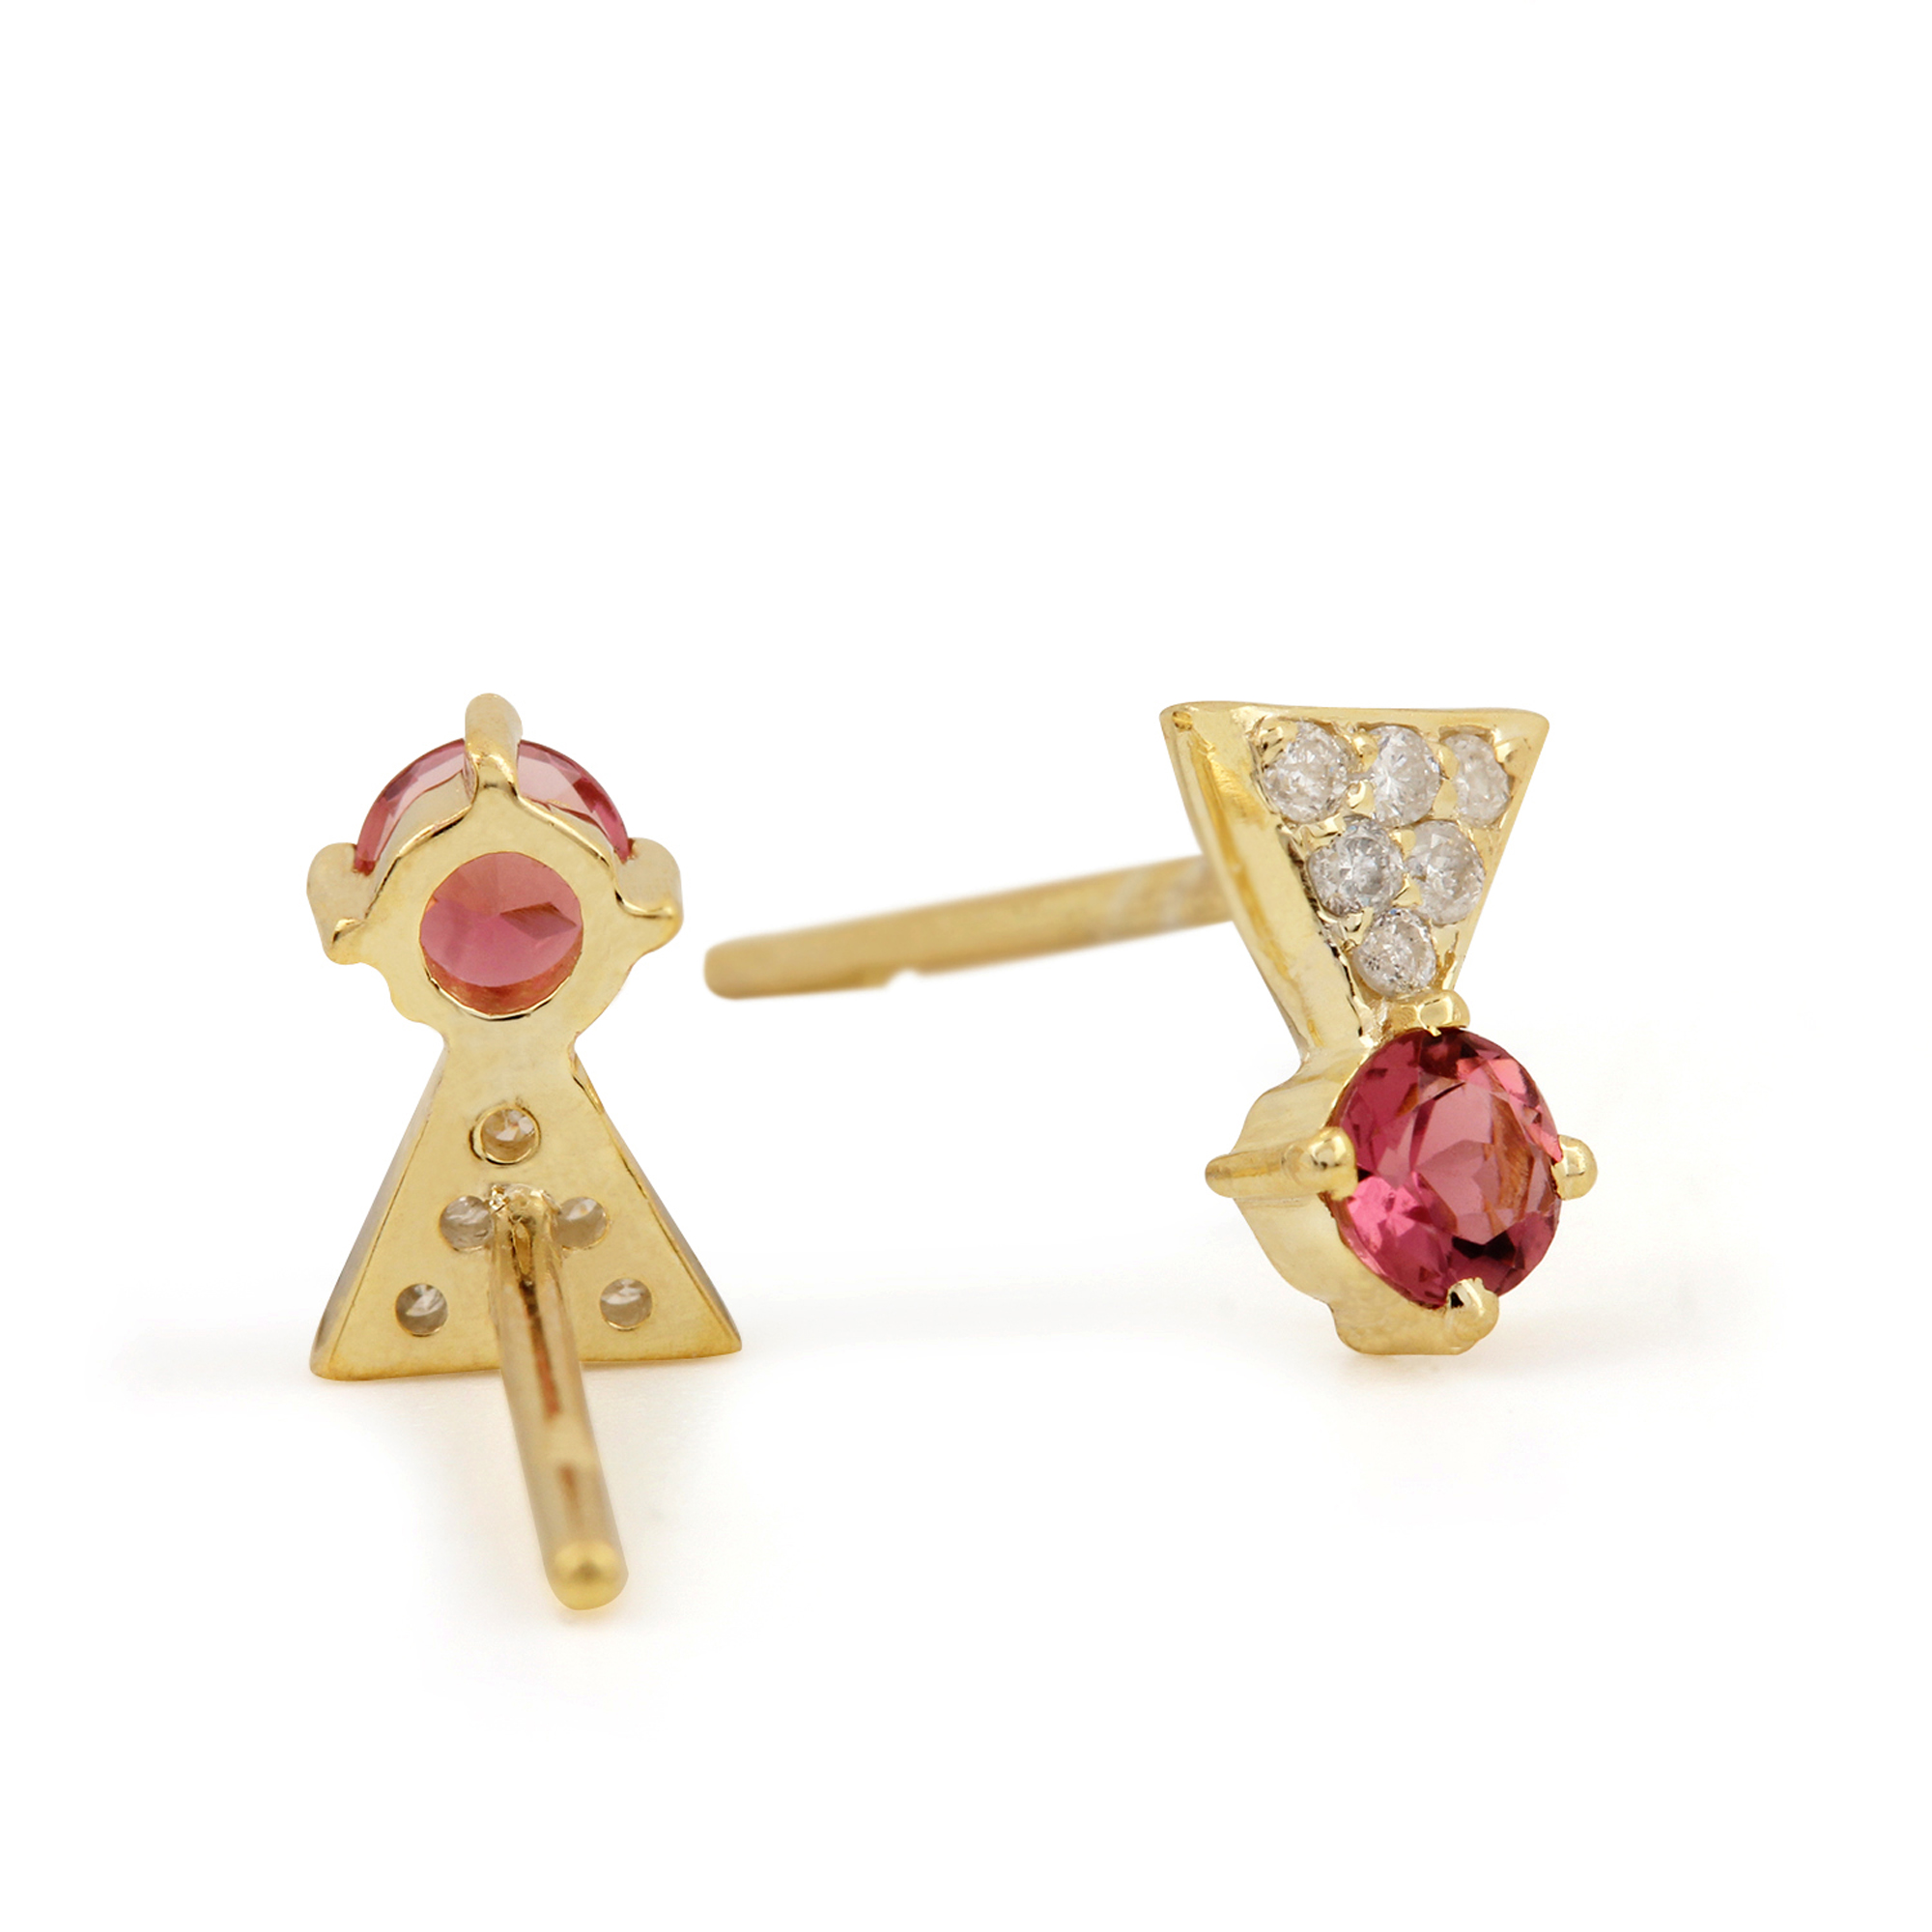 Solitaire Stud Earrings Adorned With Diamond & Natural Tourmaline 14k Solid Gold Jewelry